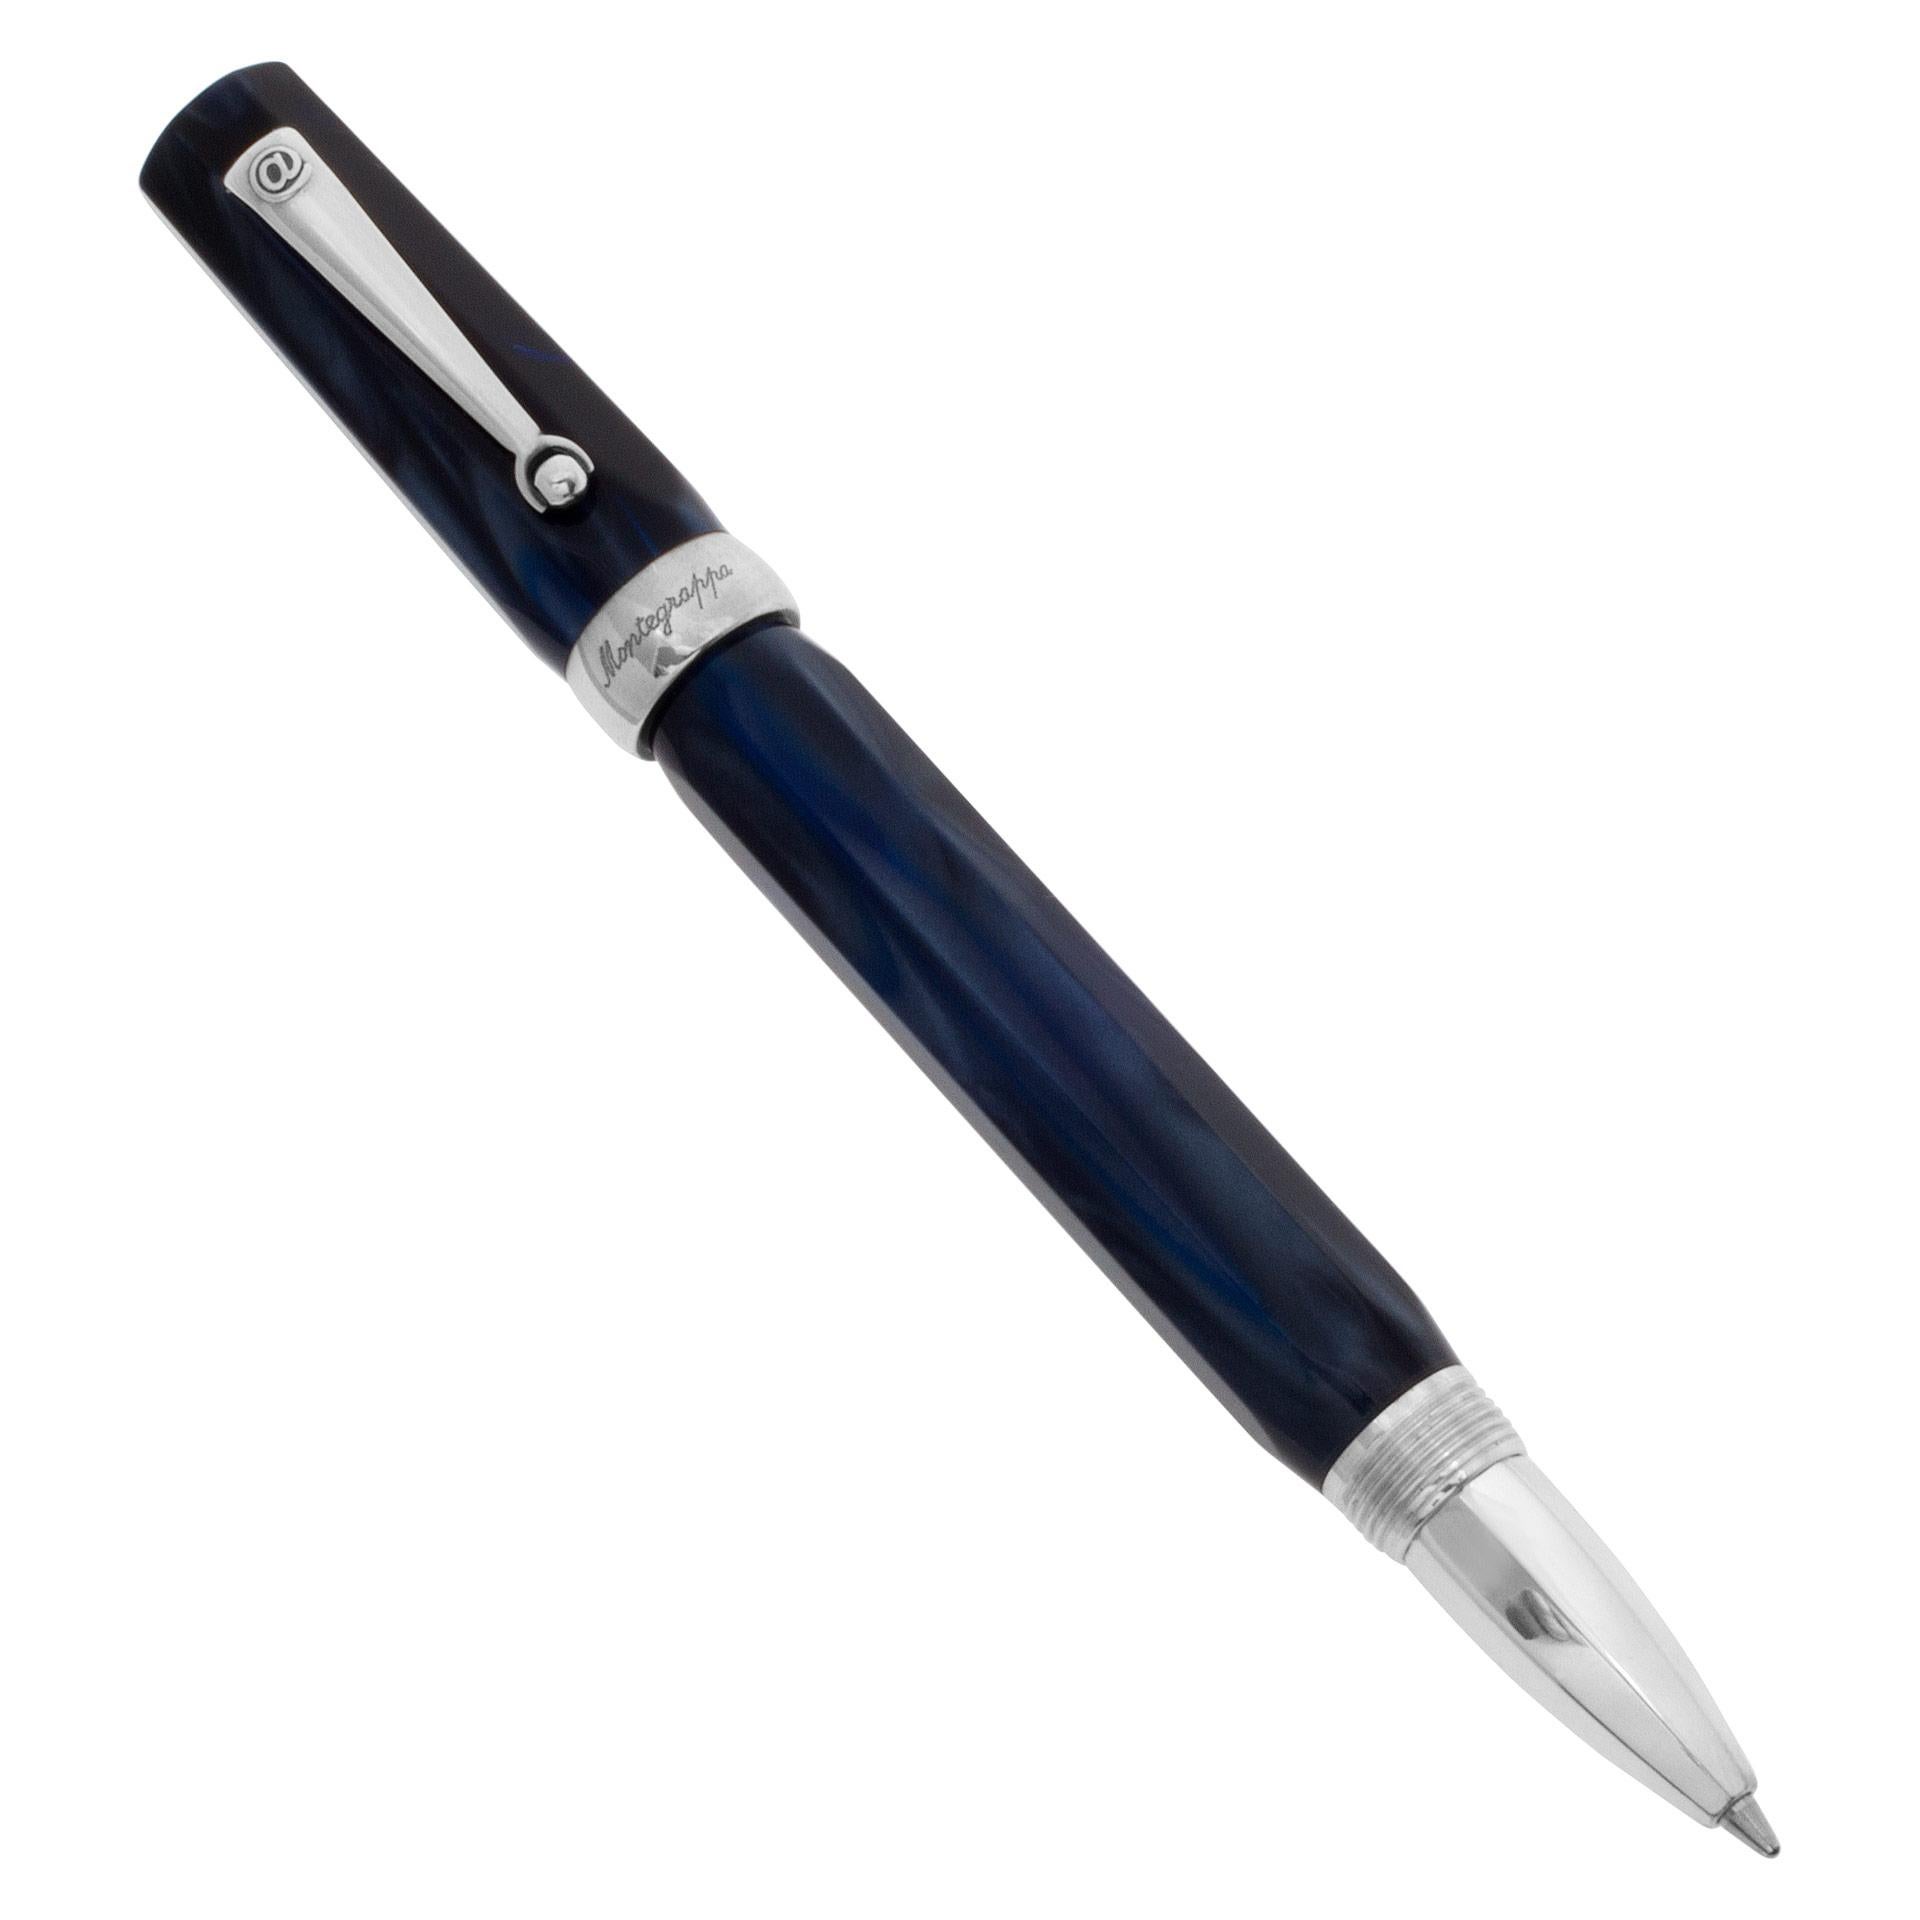 Montegrappa micra palm ballpoint pen octagonal pearlized blue resin barrel and cap with sterling silver trim. Diameter: 13mm. Length: 5.4